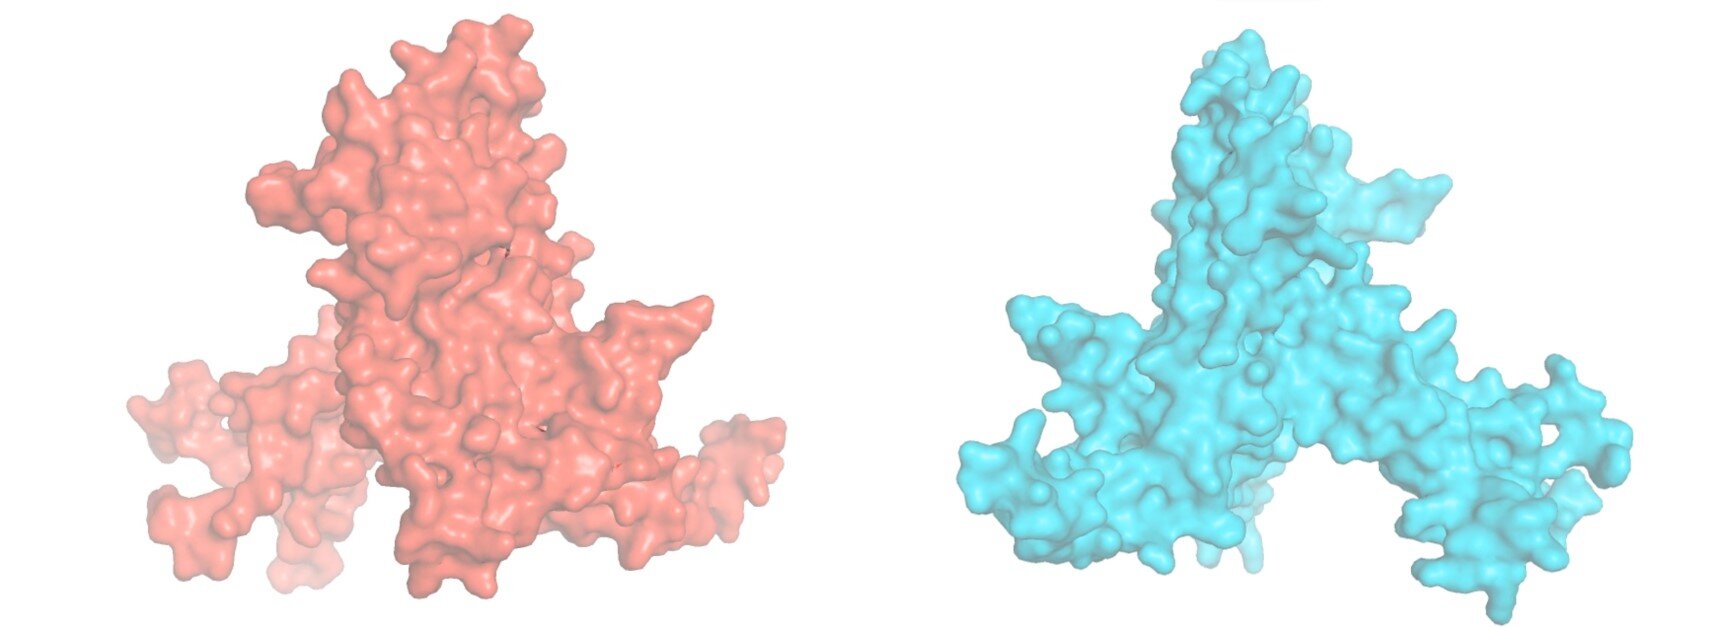 #Exploring how the heart toggles between maintenance and energy-boost mode using ribosomes